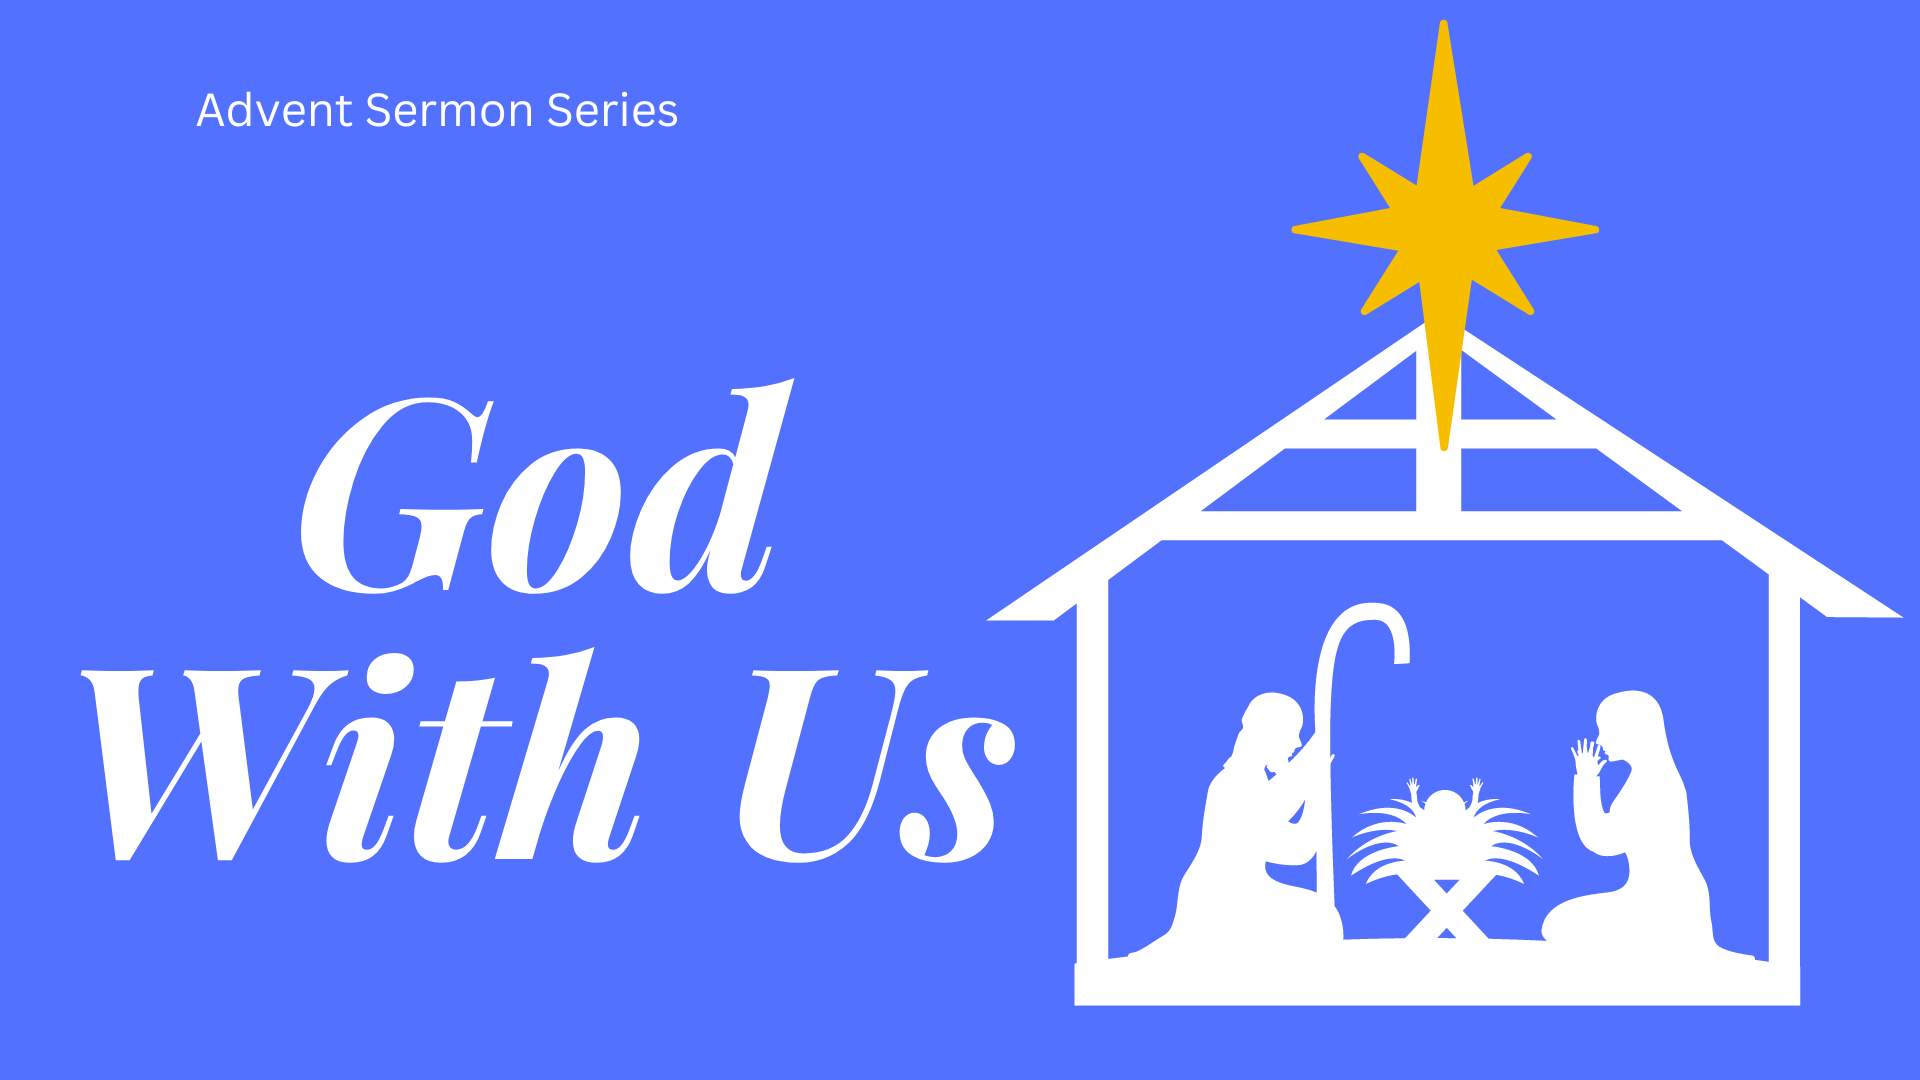 God With Us (and manger scene)